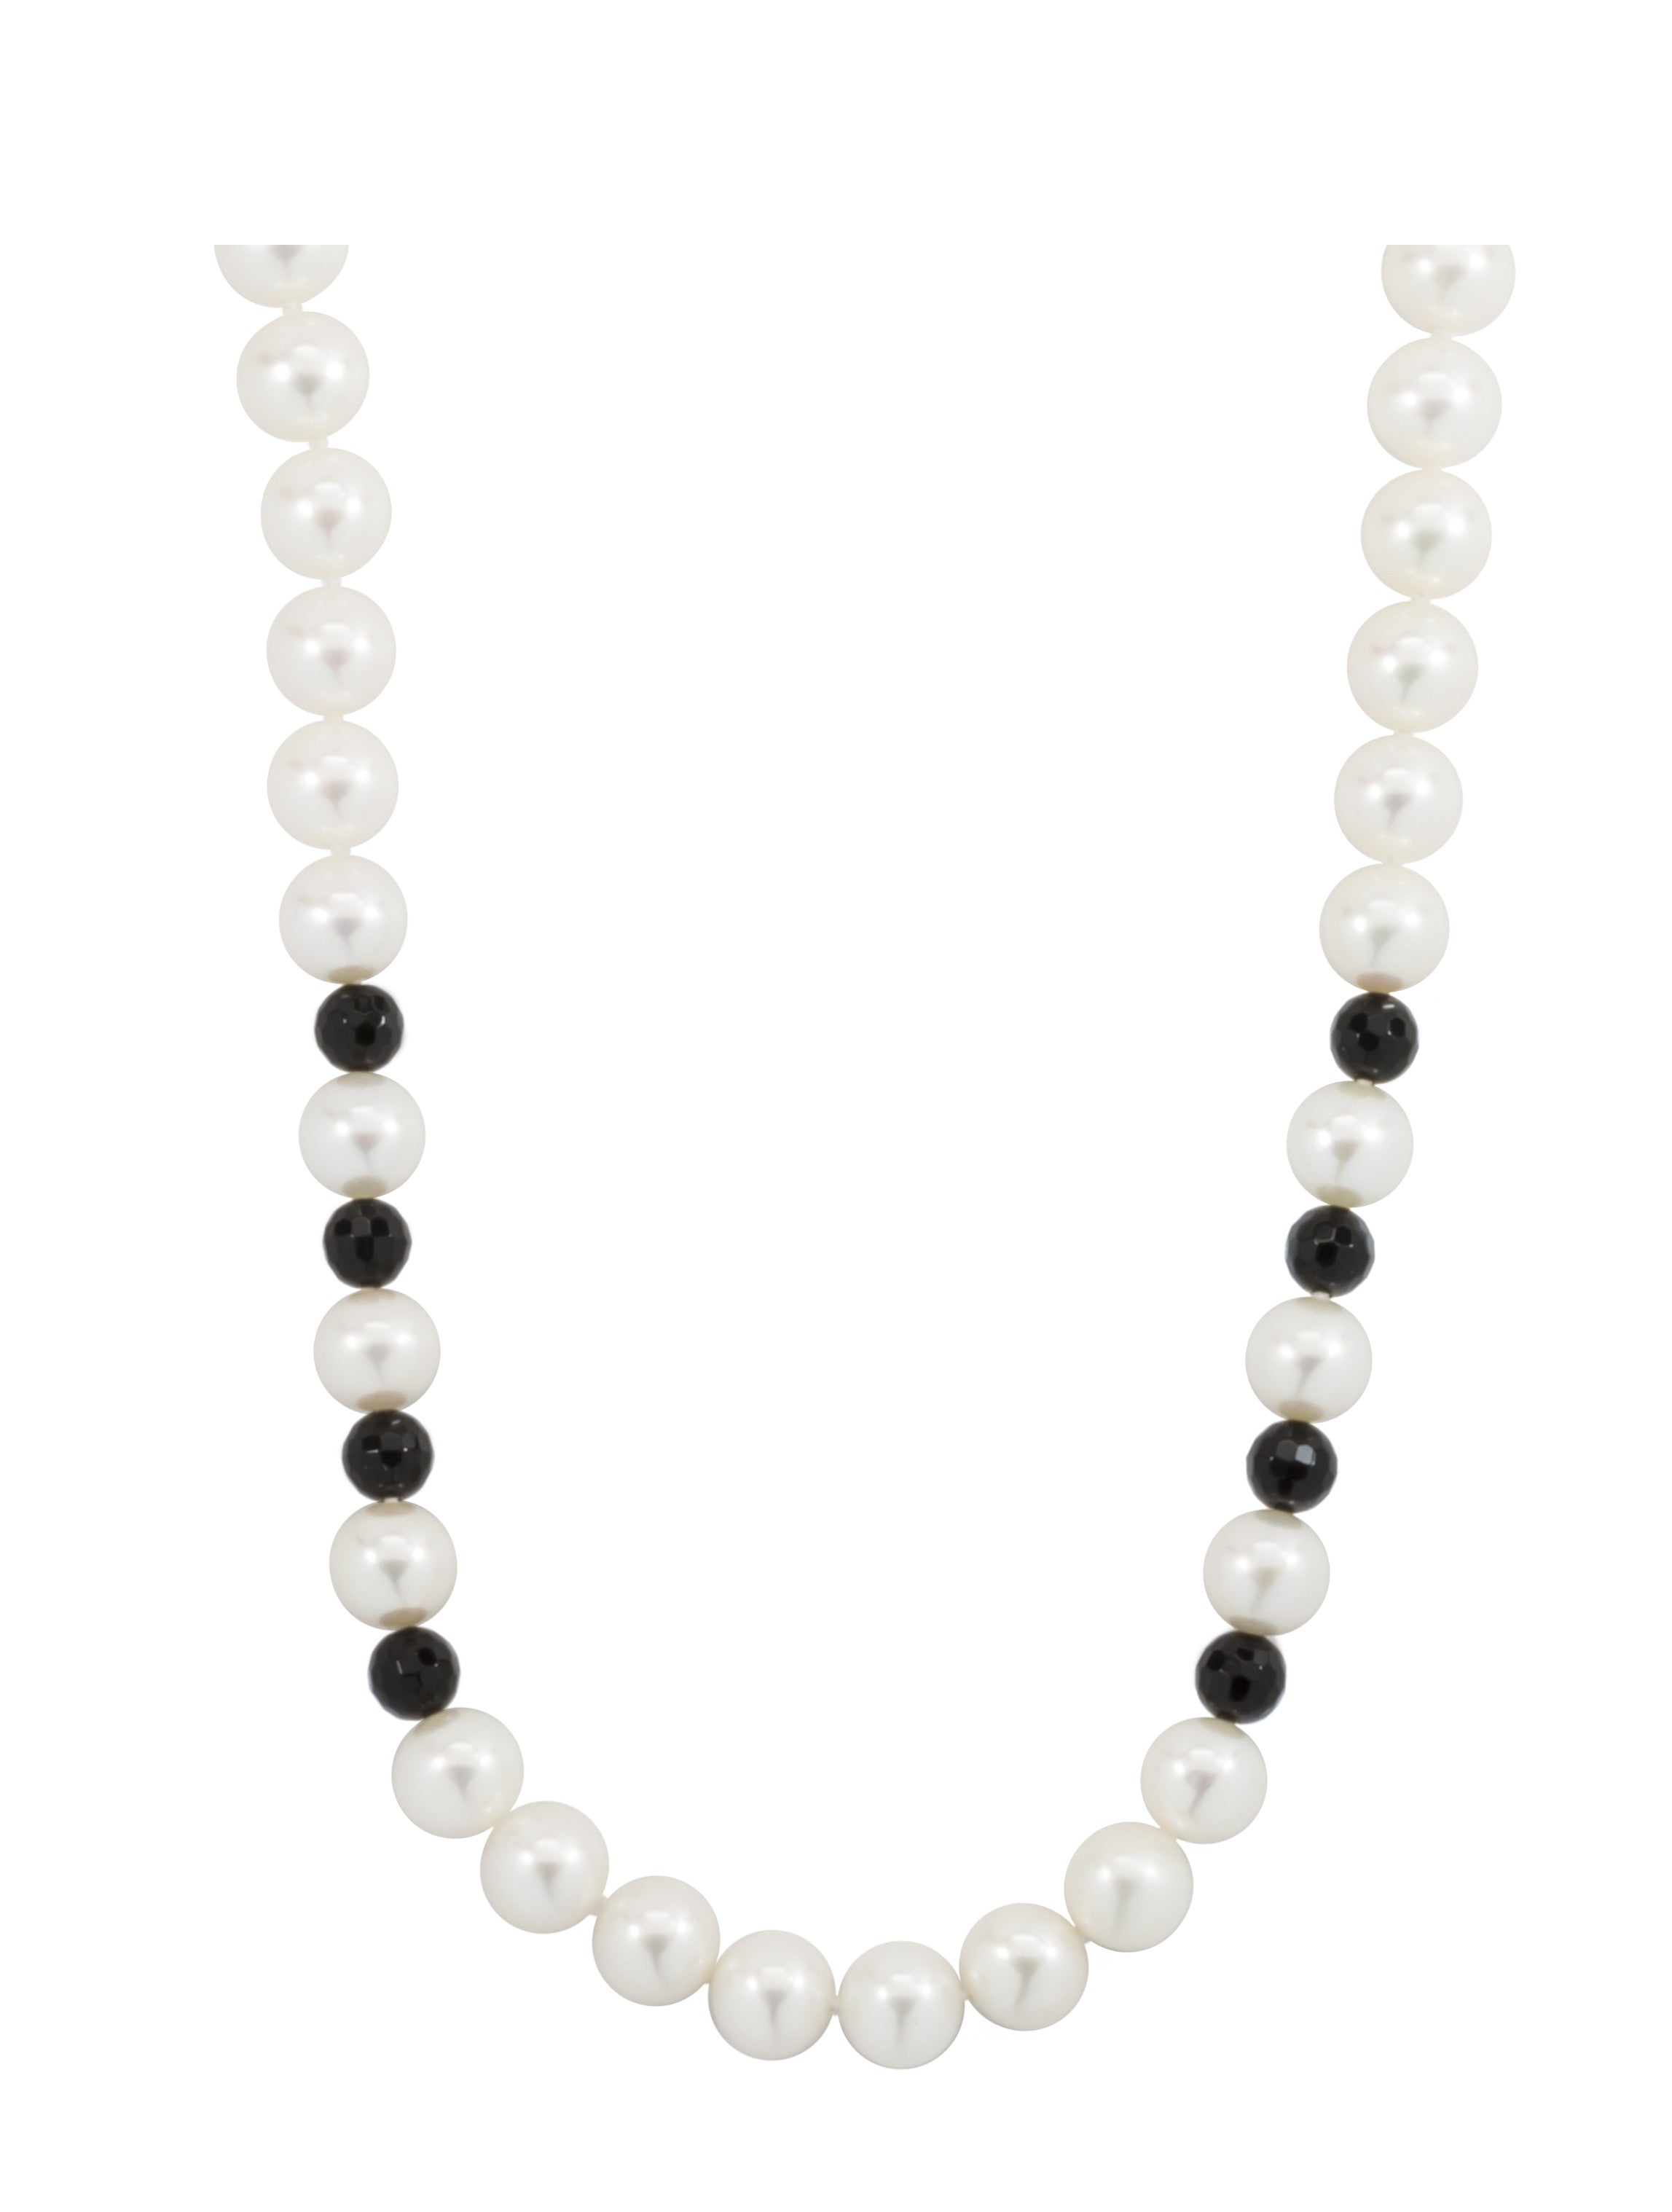 White Freshwater Pearl & Faceted Black Onyx Beads Endless Necklace